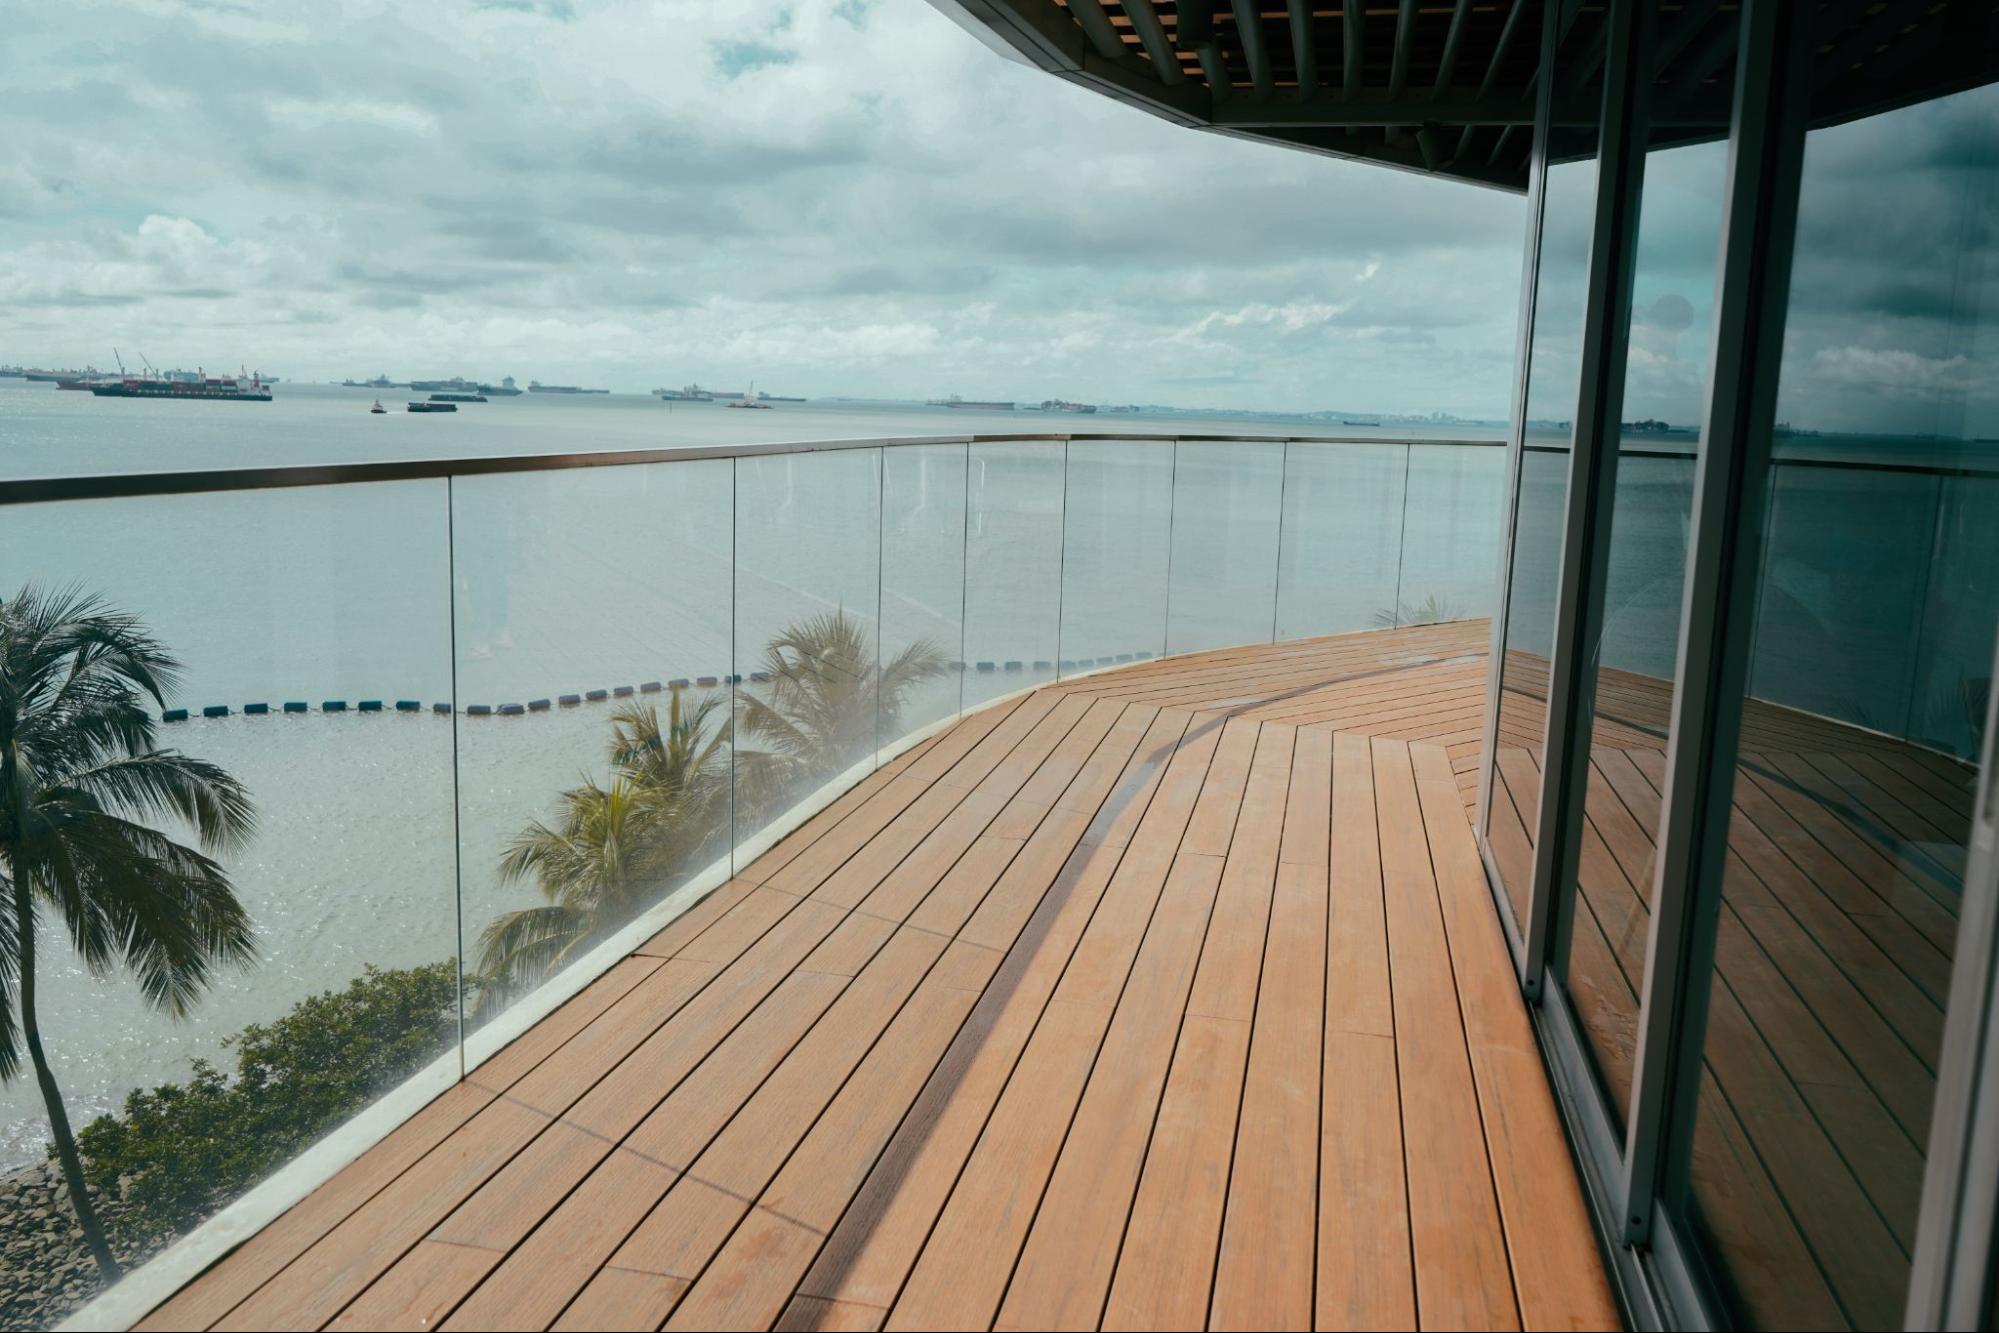 5 benefits of adding balcony decking to your home - 5 Benefits of Adding Balcony Decking to Your Home